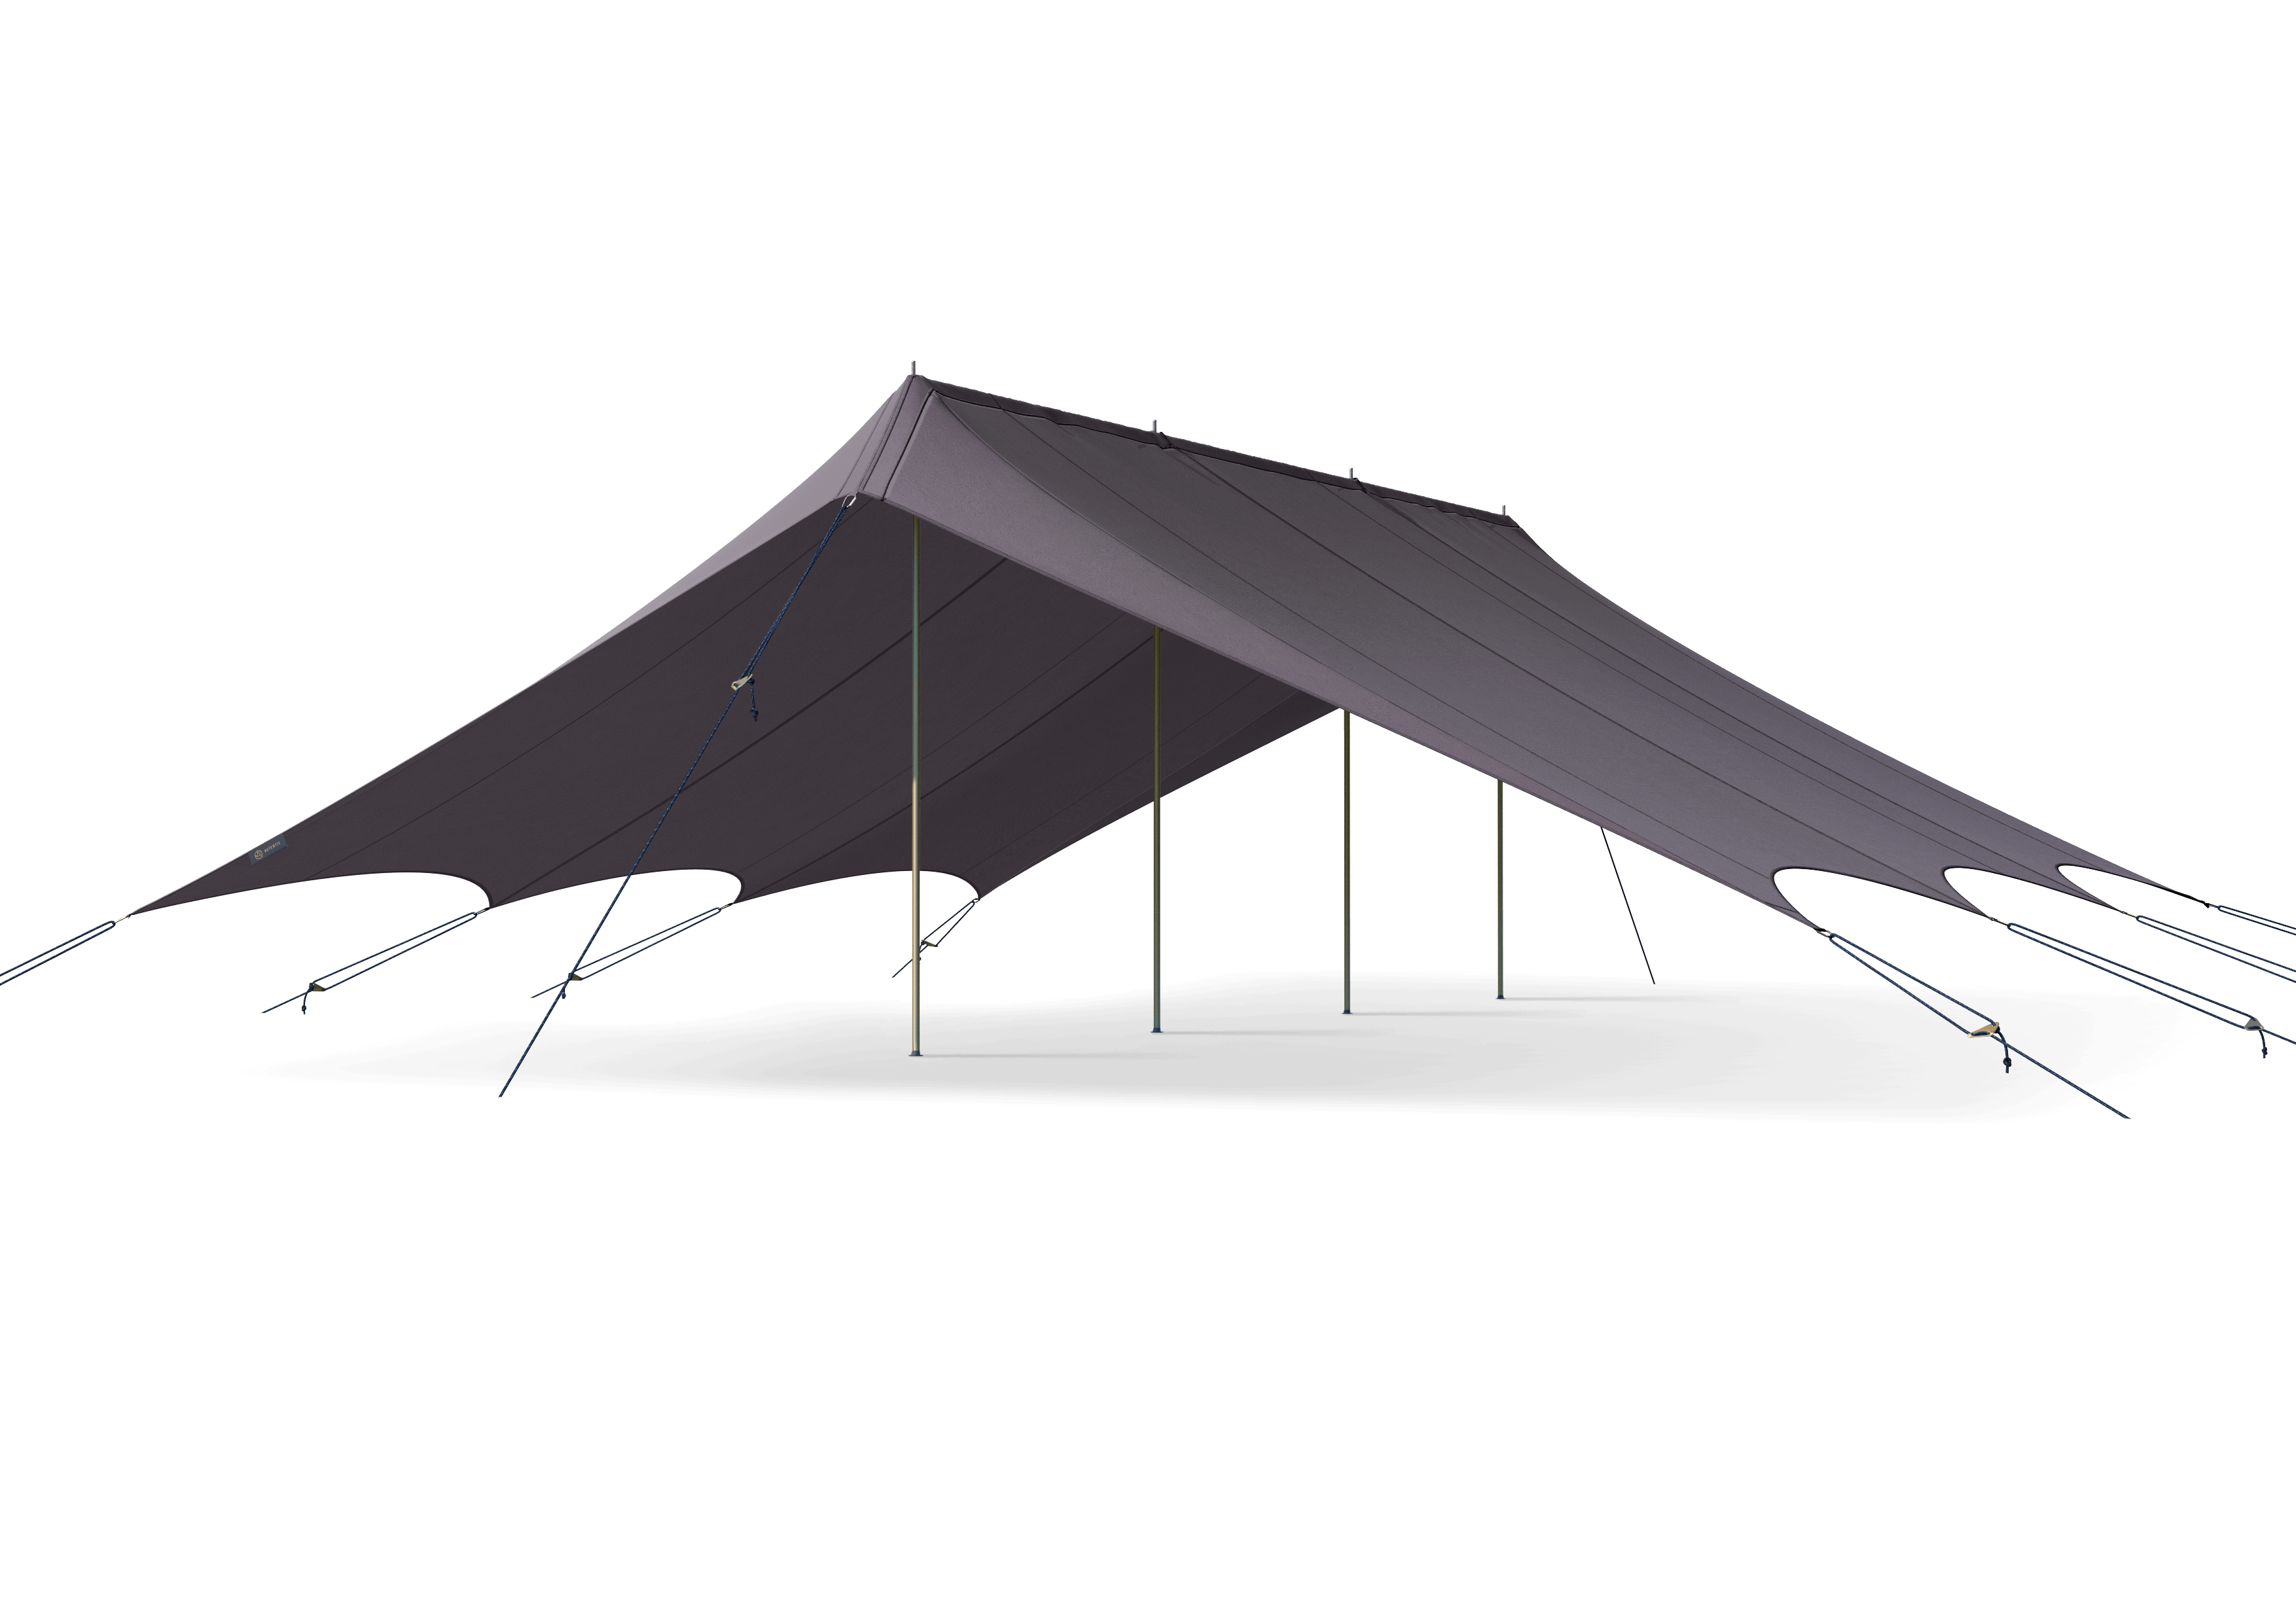 Beyond tents camping autentic tents patrol tents army tents scouting tents